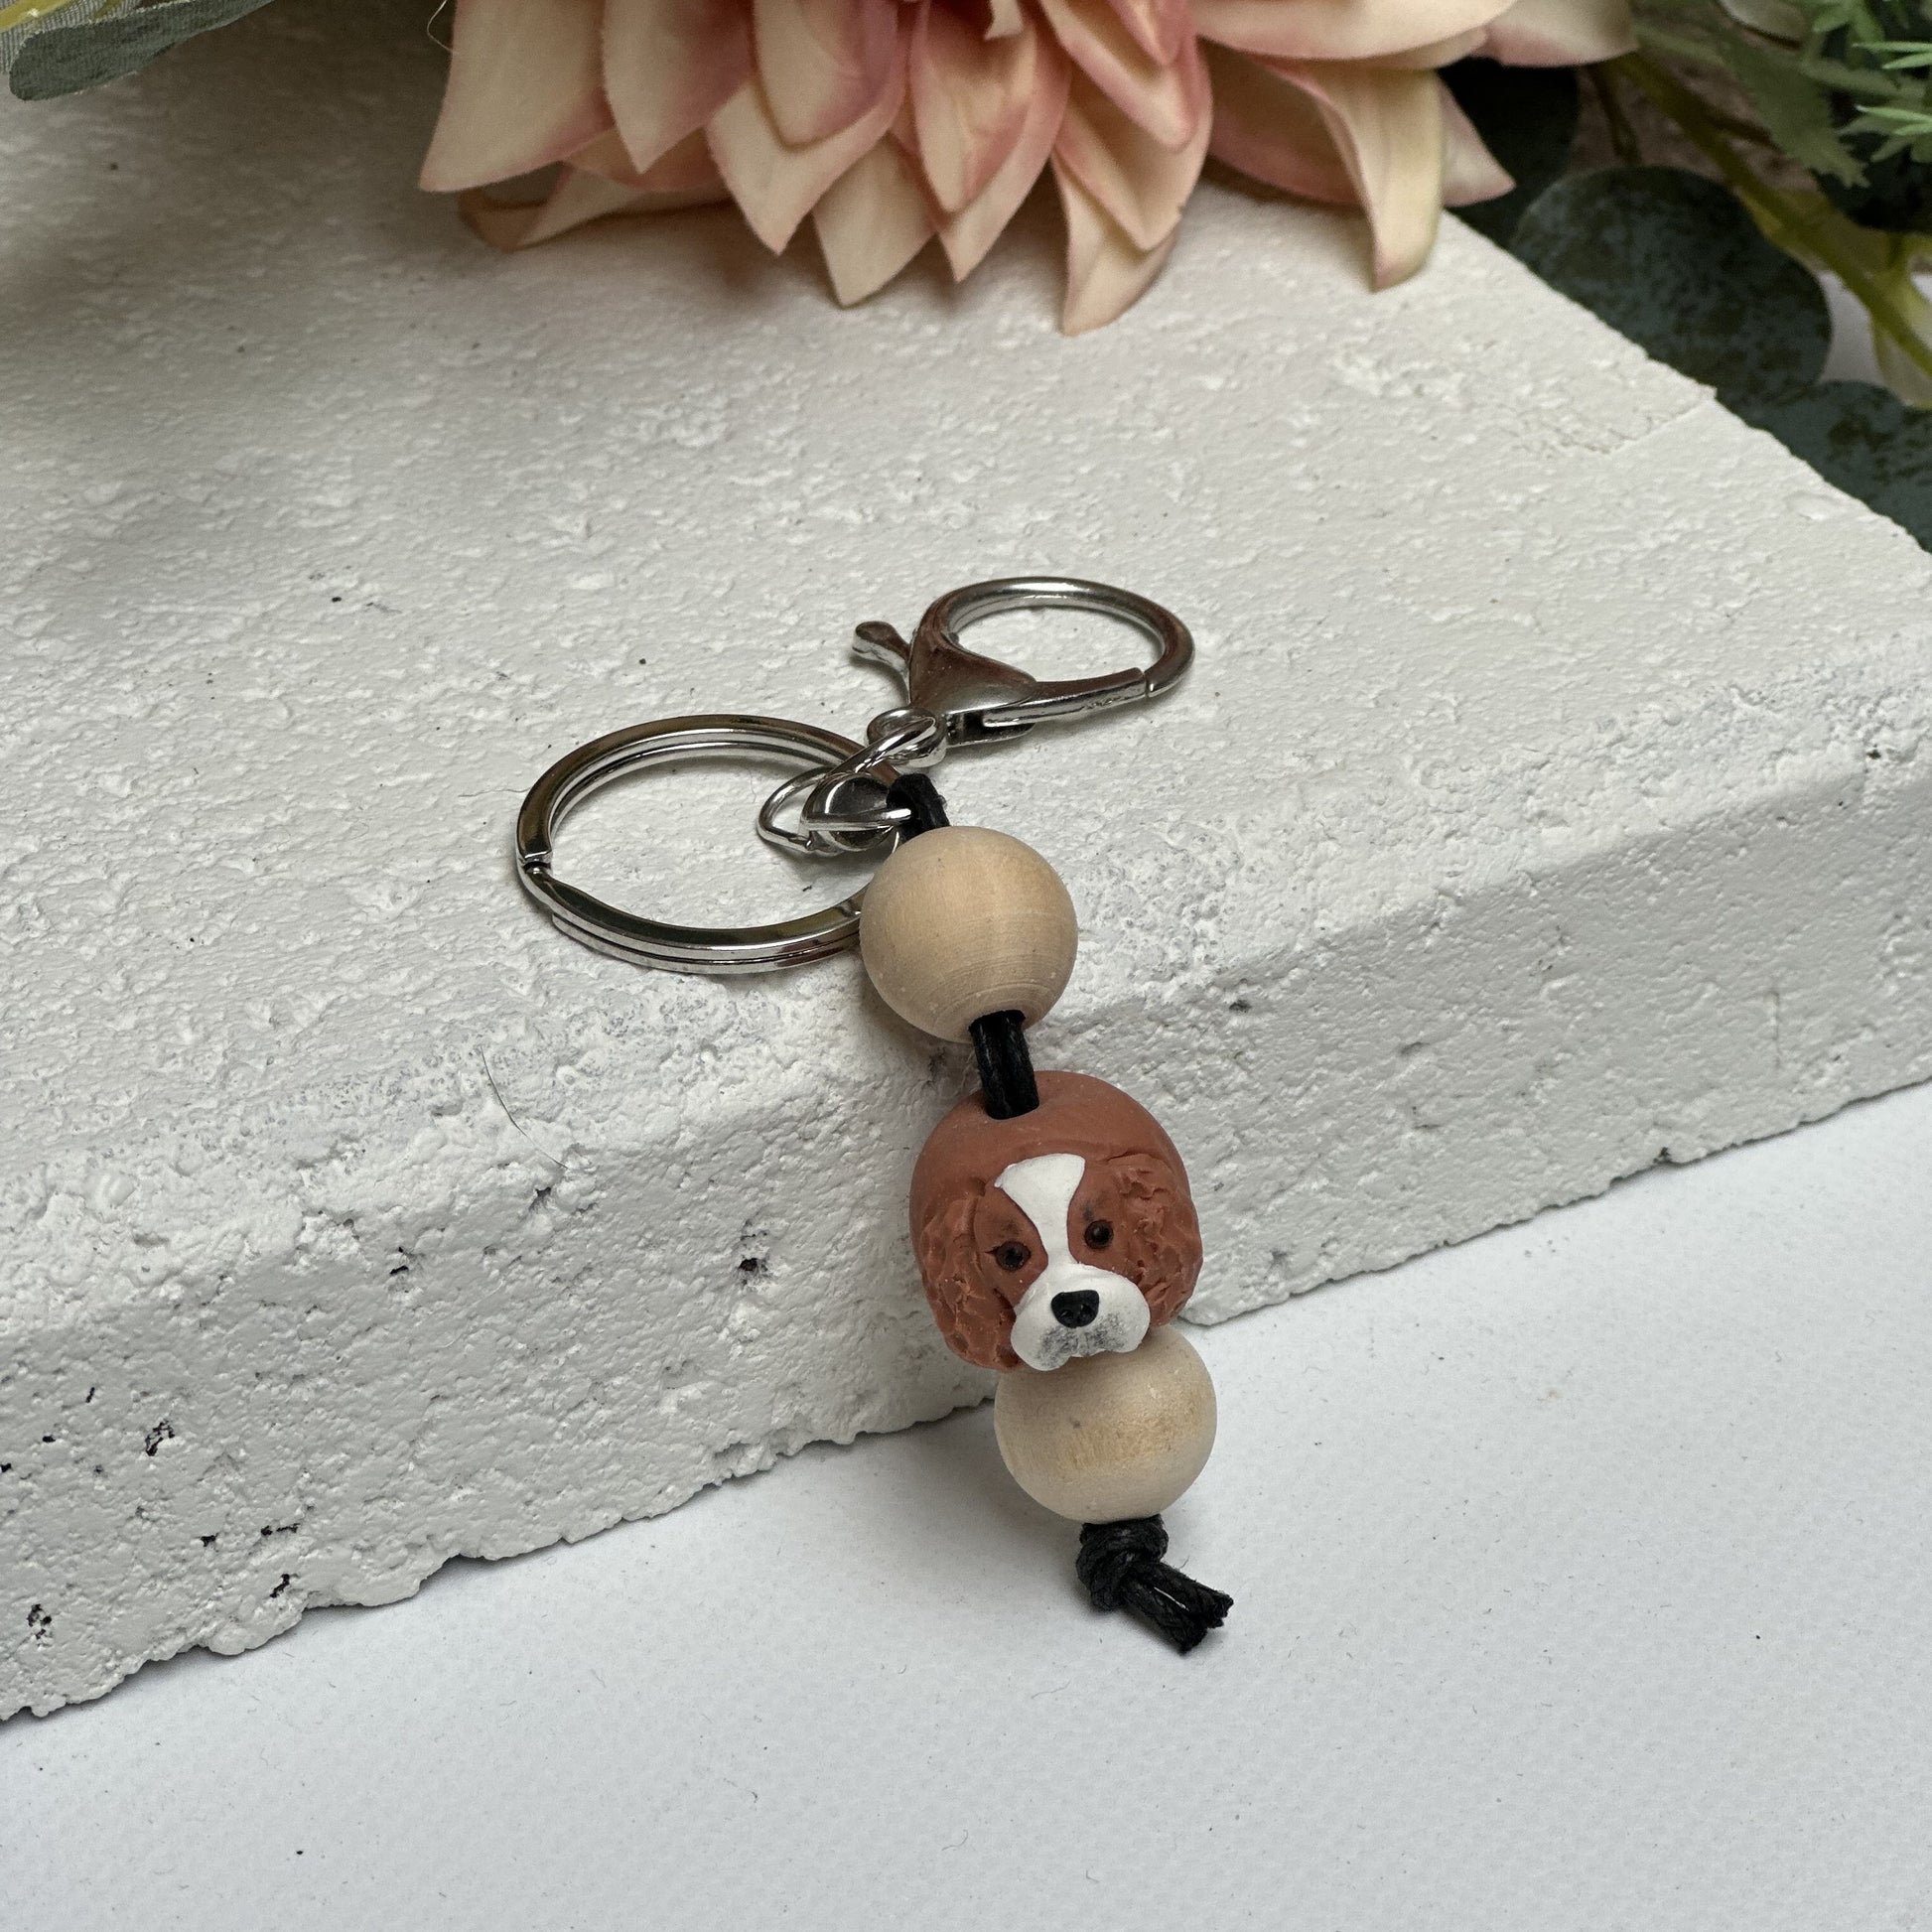 Handmade cavalier king charles spaniel polymer clay and timber keying on white textured background with a pink flower in the background